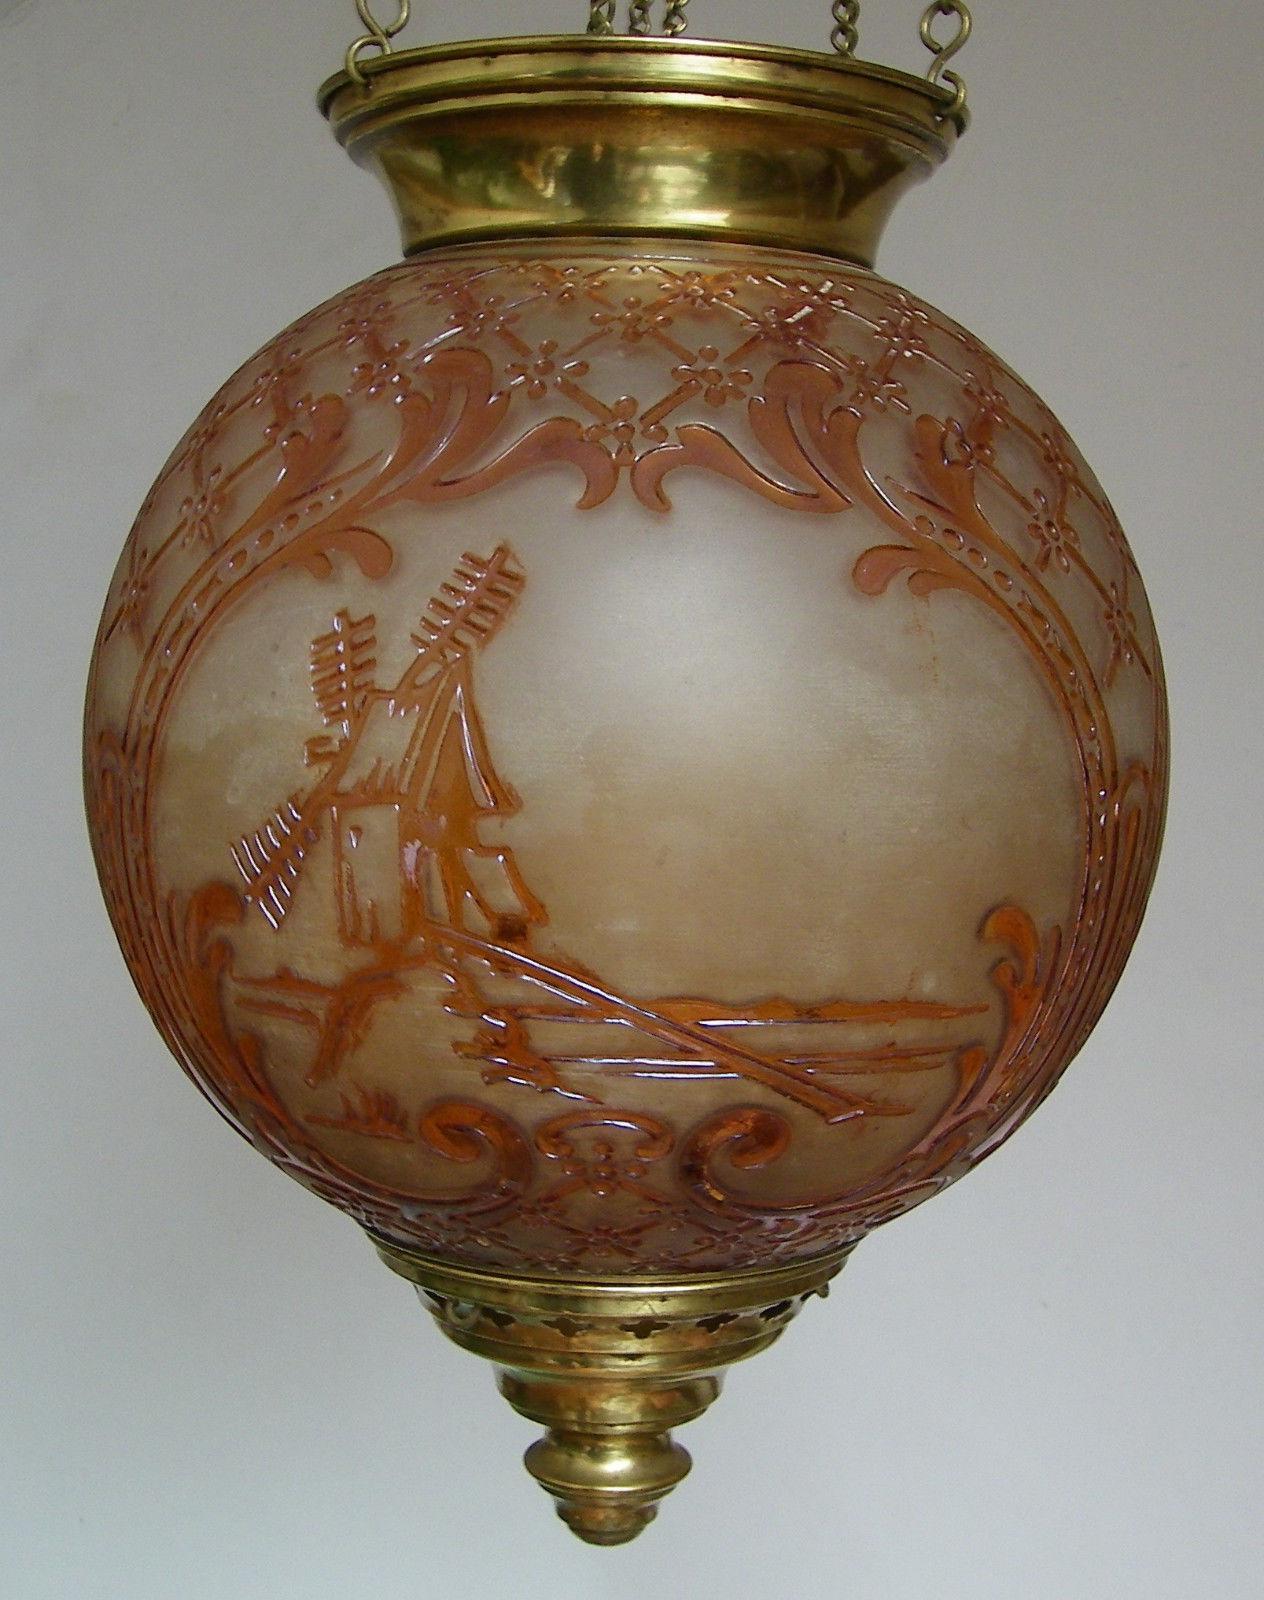 19thc French Napoleon III Crystal Hanging Lantern - Countryside Scenes -Baccarat For Sale 4